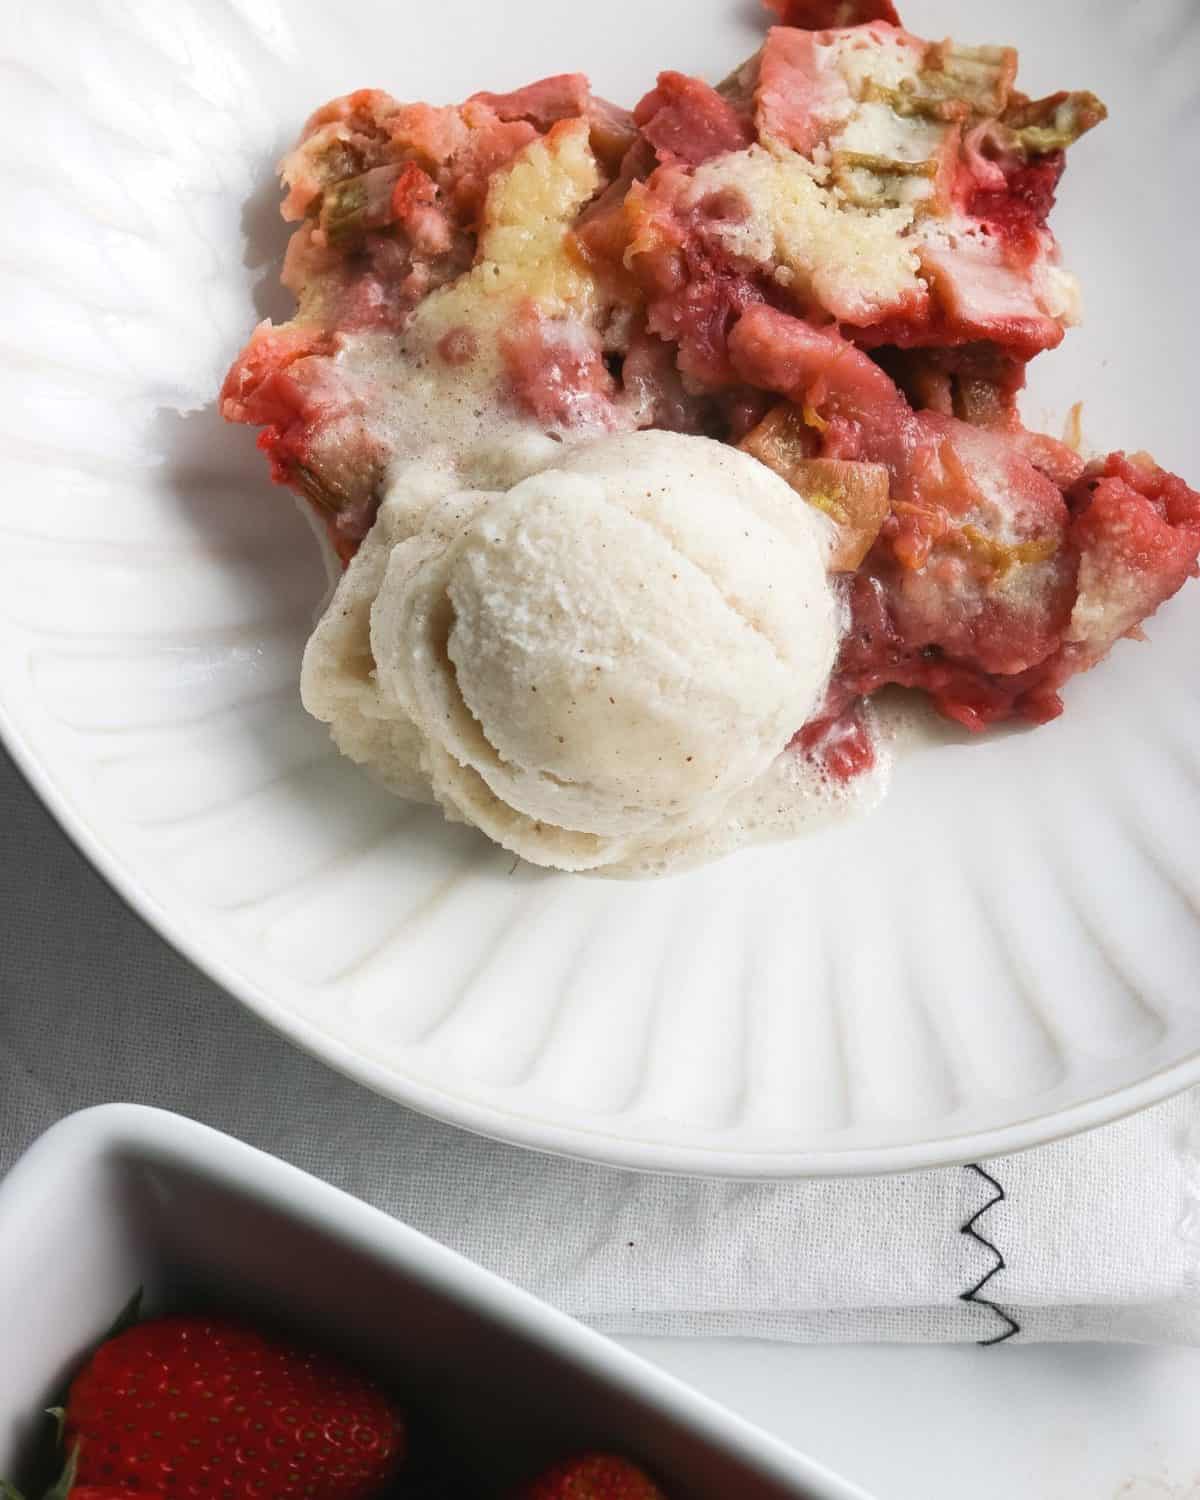 An overhead shot of strawberry cobbler and rhubarb with ice cream.